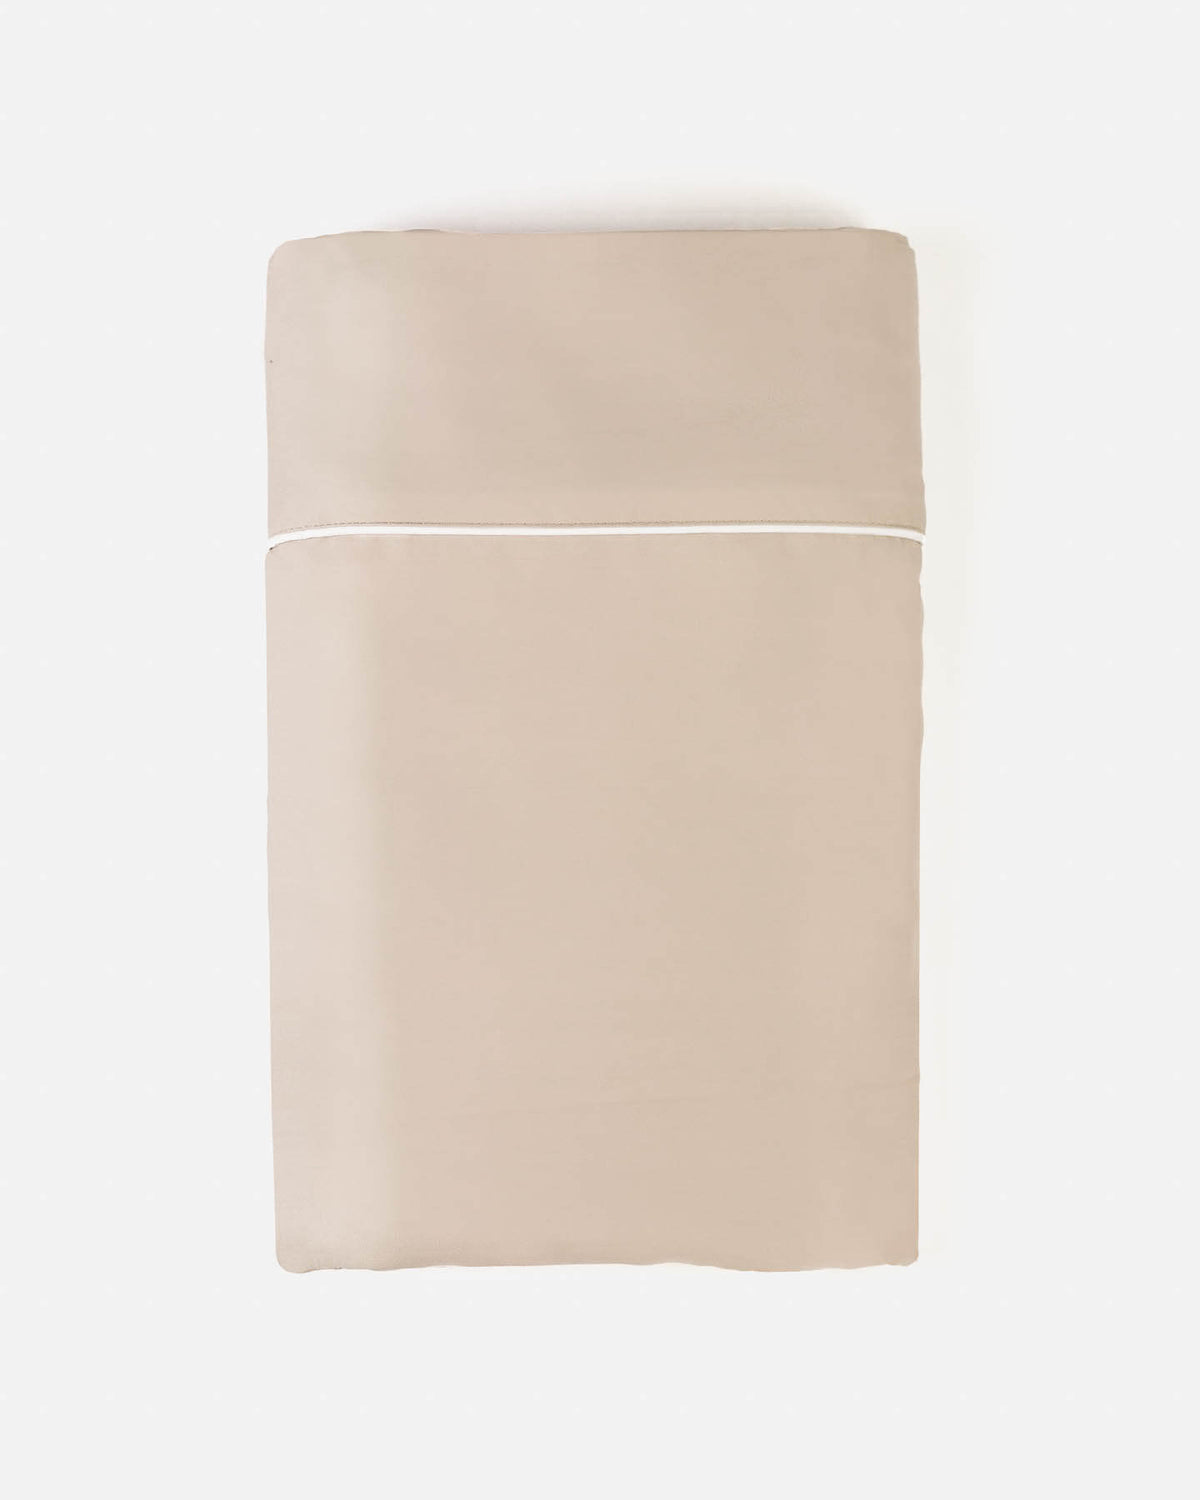 ava and ava ph organic bamboo lyocell flat sheet sand beige with white contrast piping at the top hem